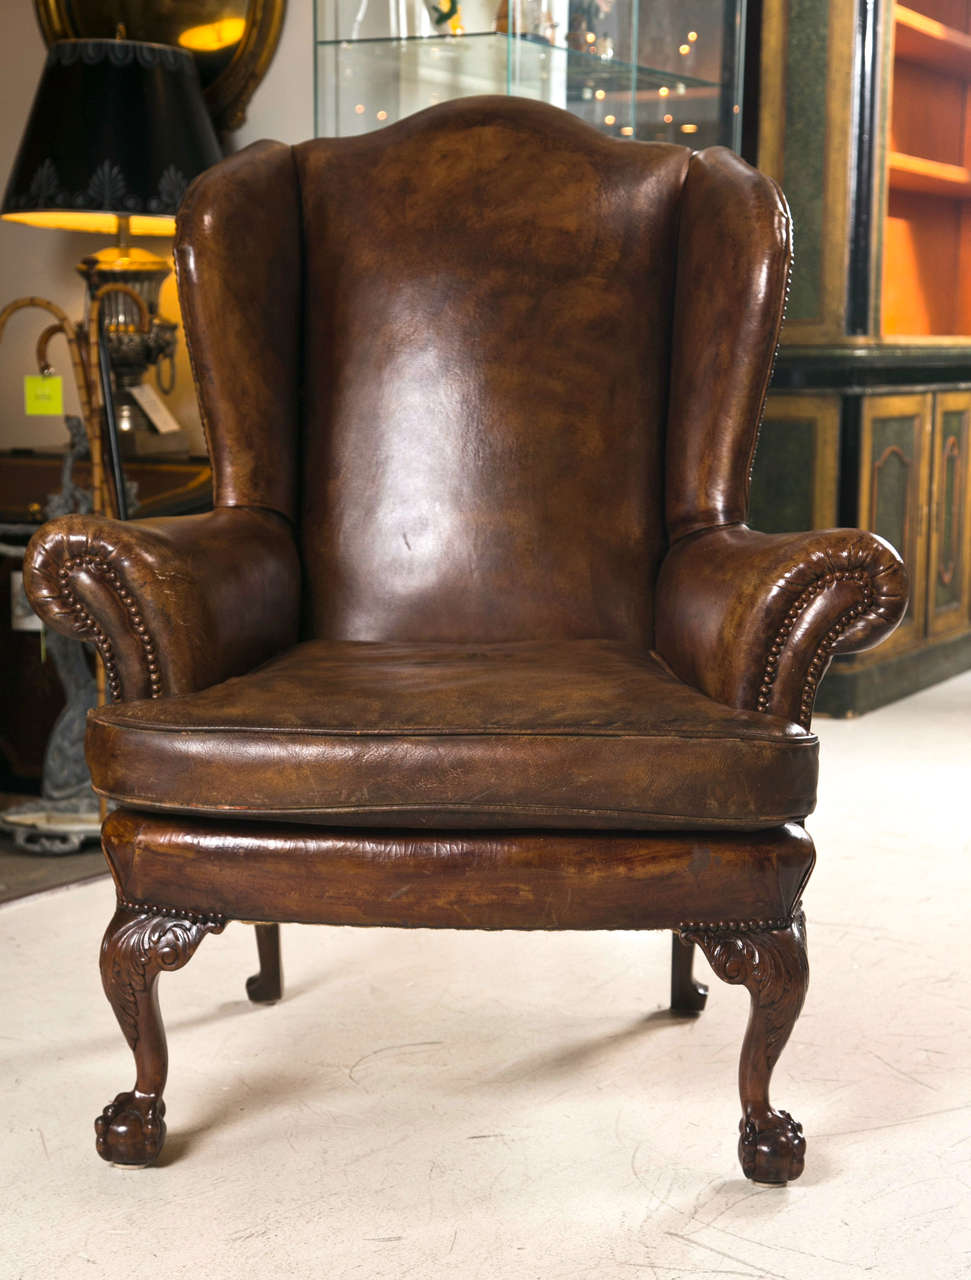 Late 19th C leather wingback chair with ball and claw feet